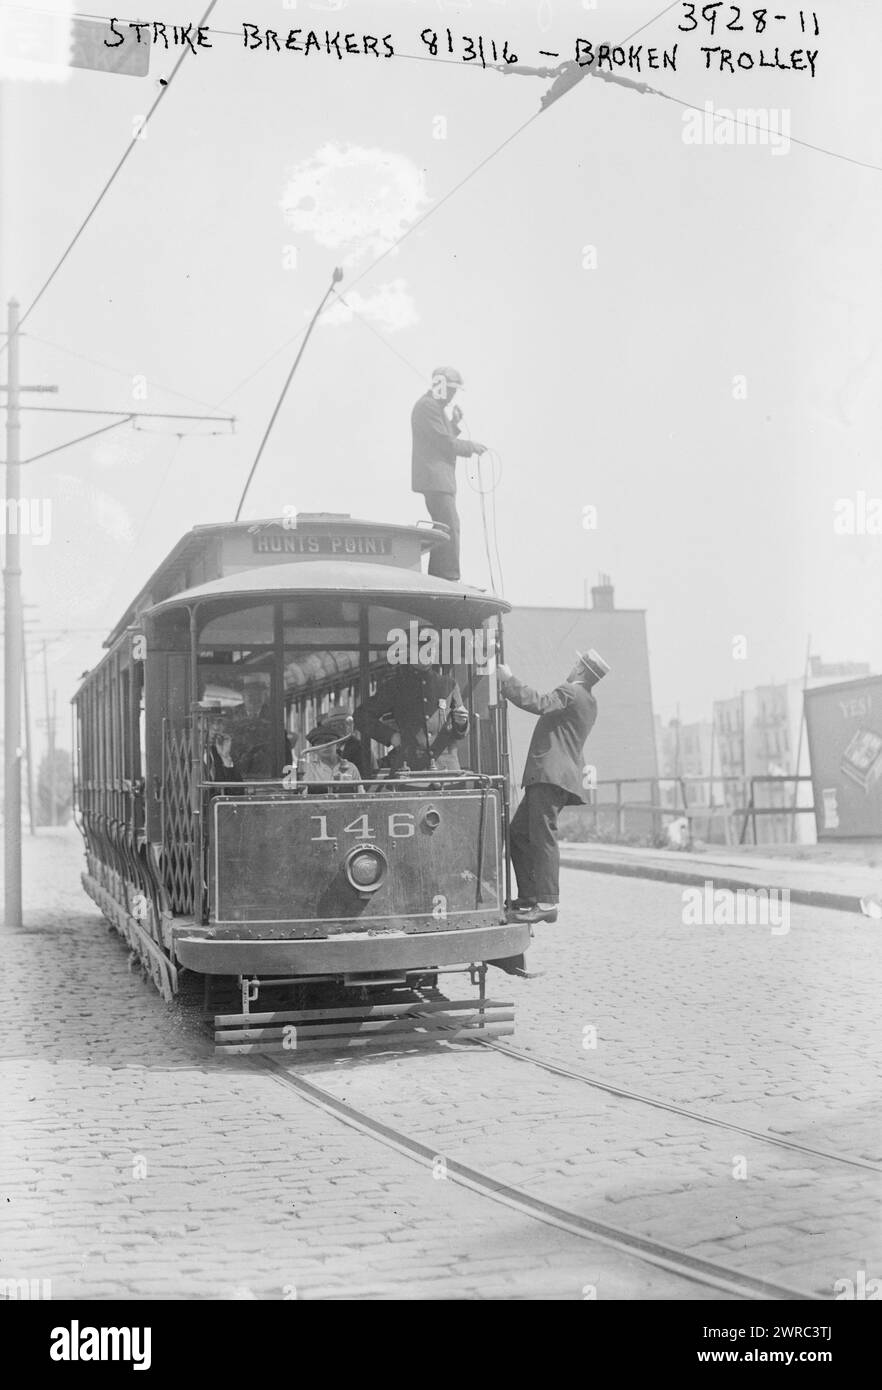 Strike breakers, broken trolley, Photograph probably taken during the streetcar strike in New York City which took place in July and August of 1916., 1916 Aug. 3, Glass negatives, 1 negative: glass Stock Photo